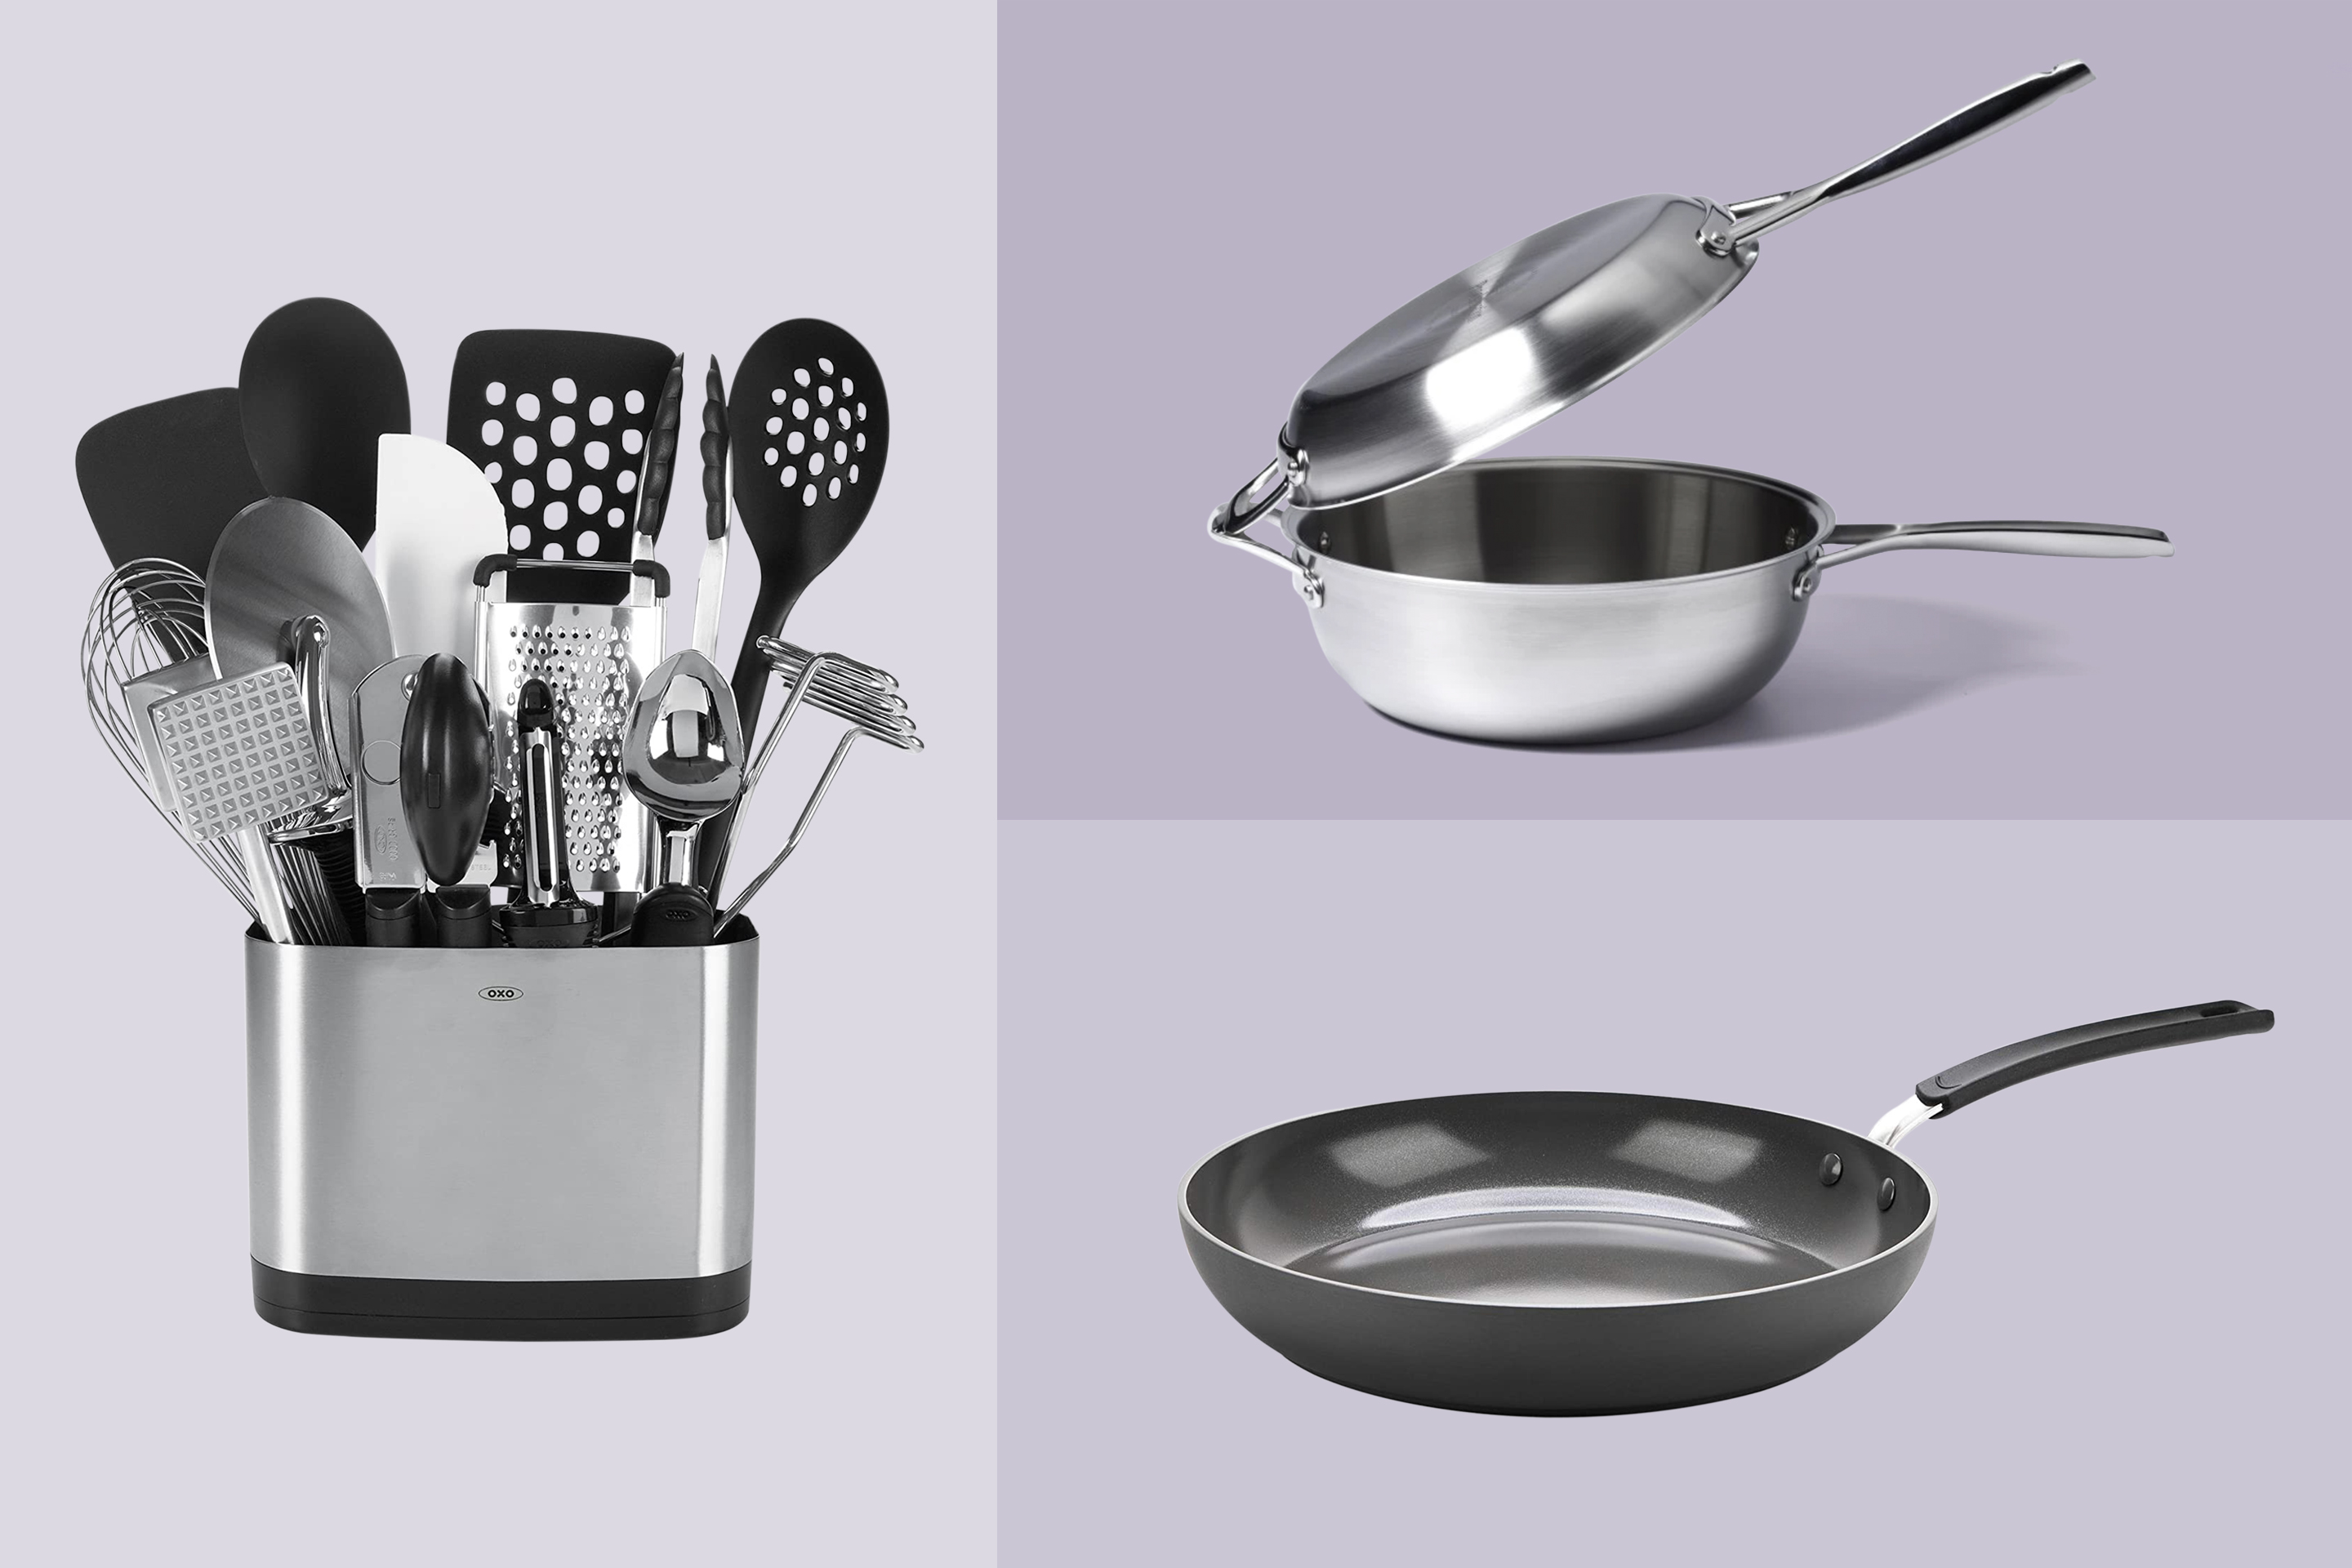 The Best Pots and Pans for Your Money